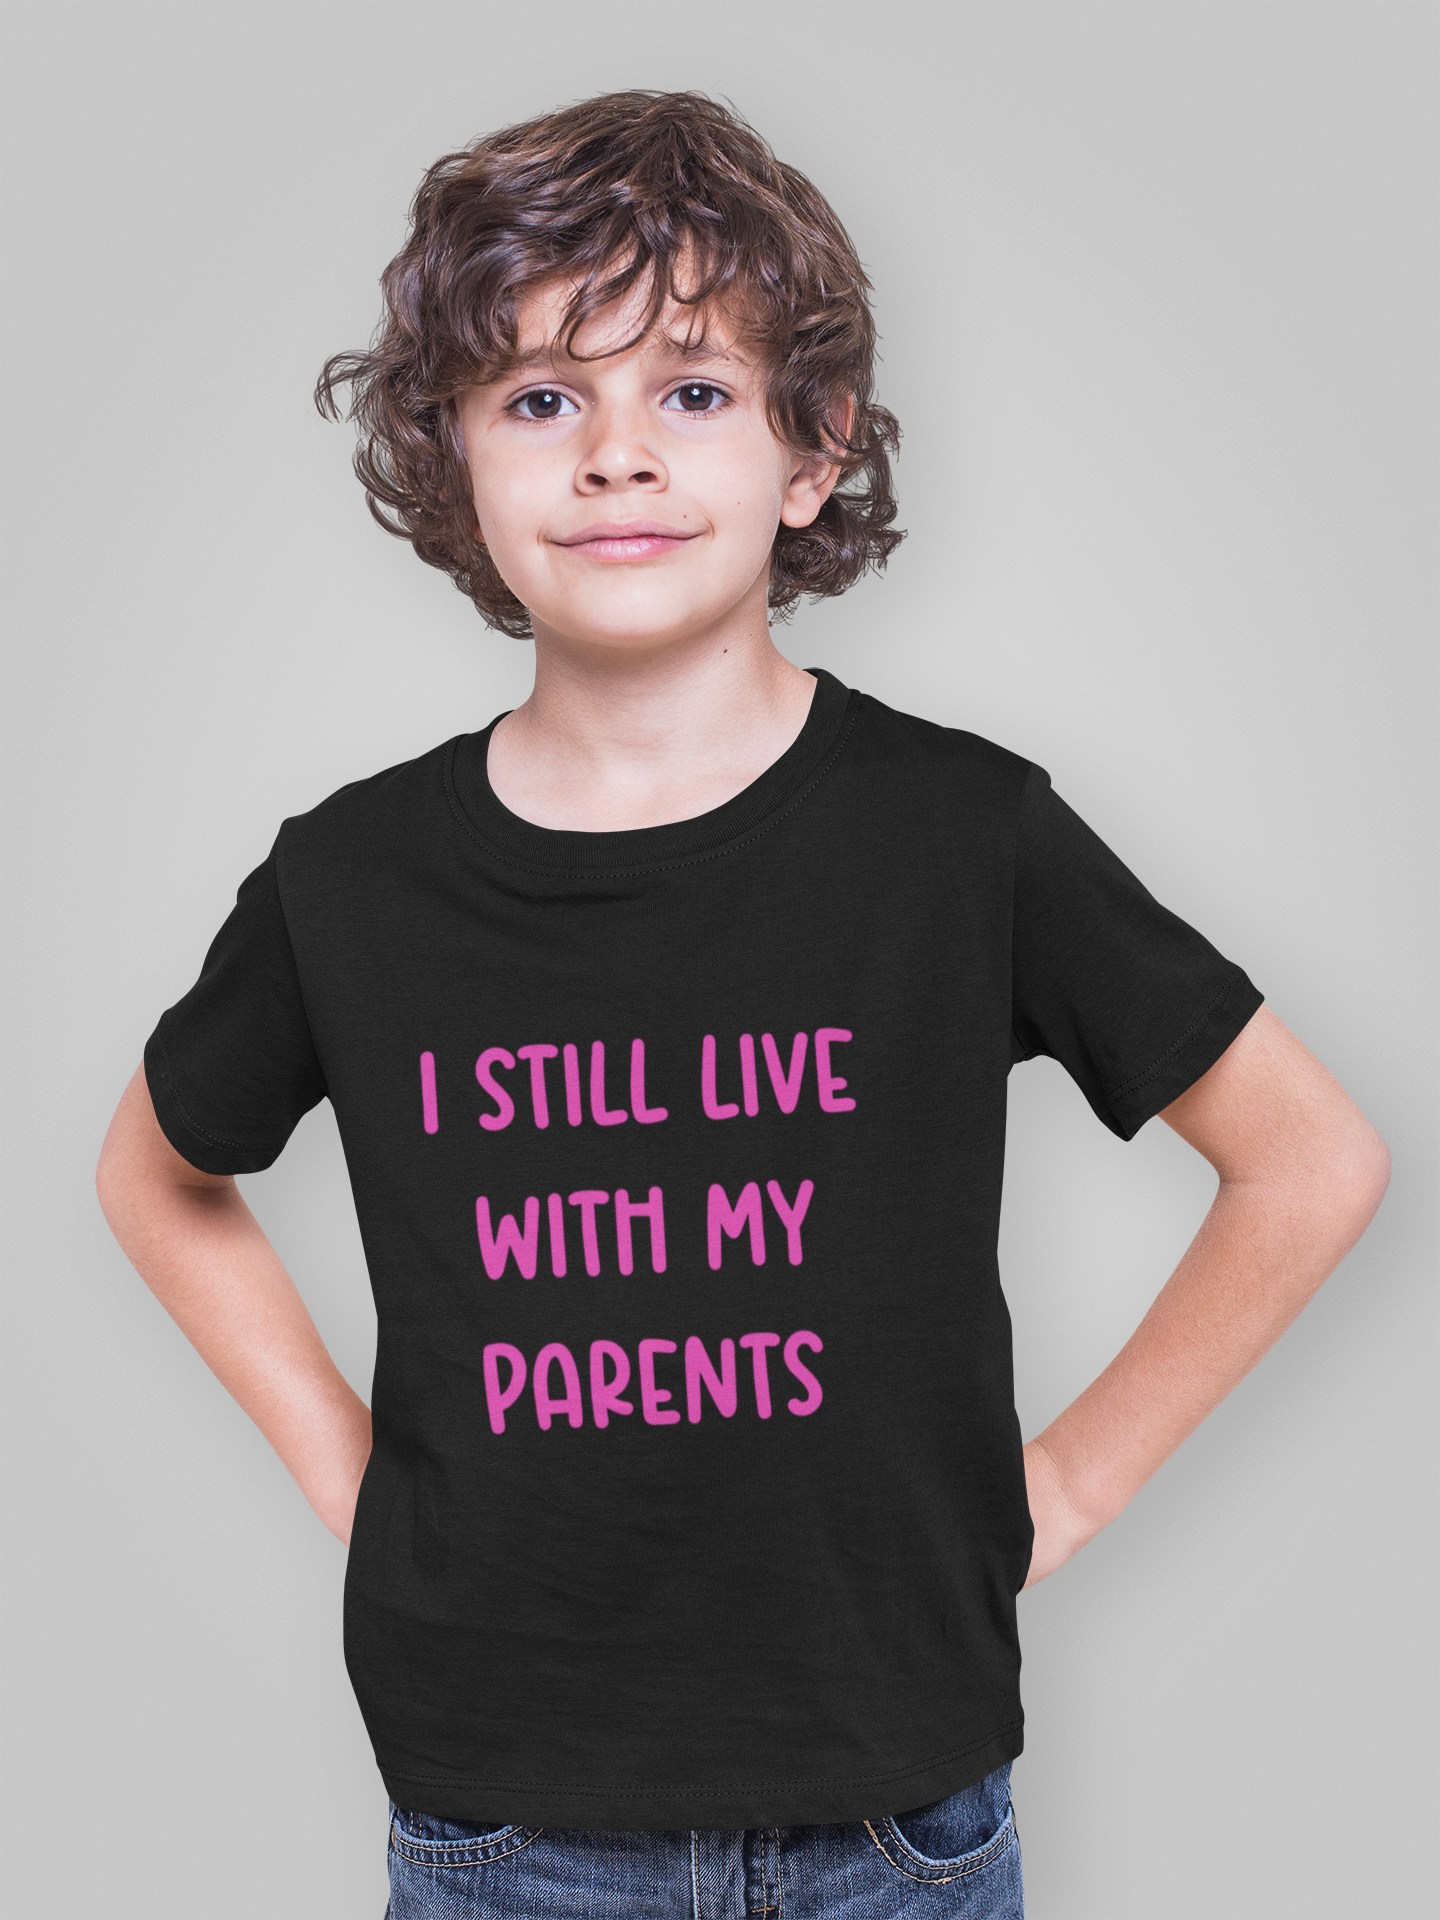 I still live with my parents t-shirt Black and Pink